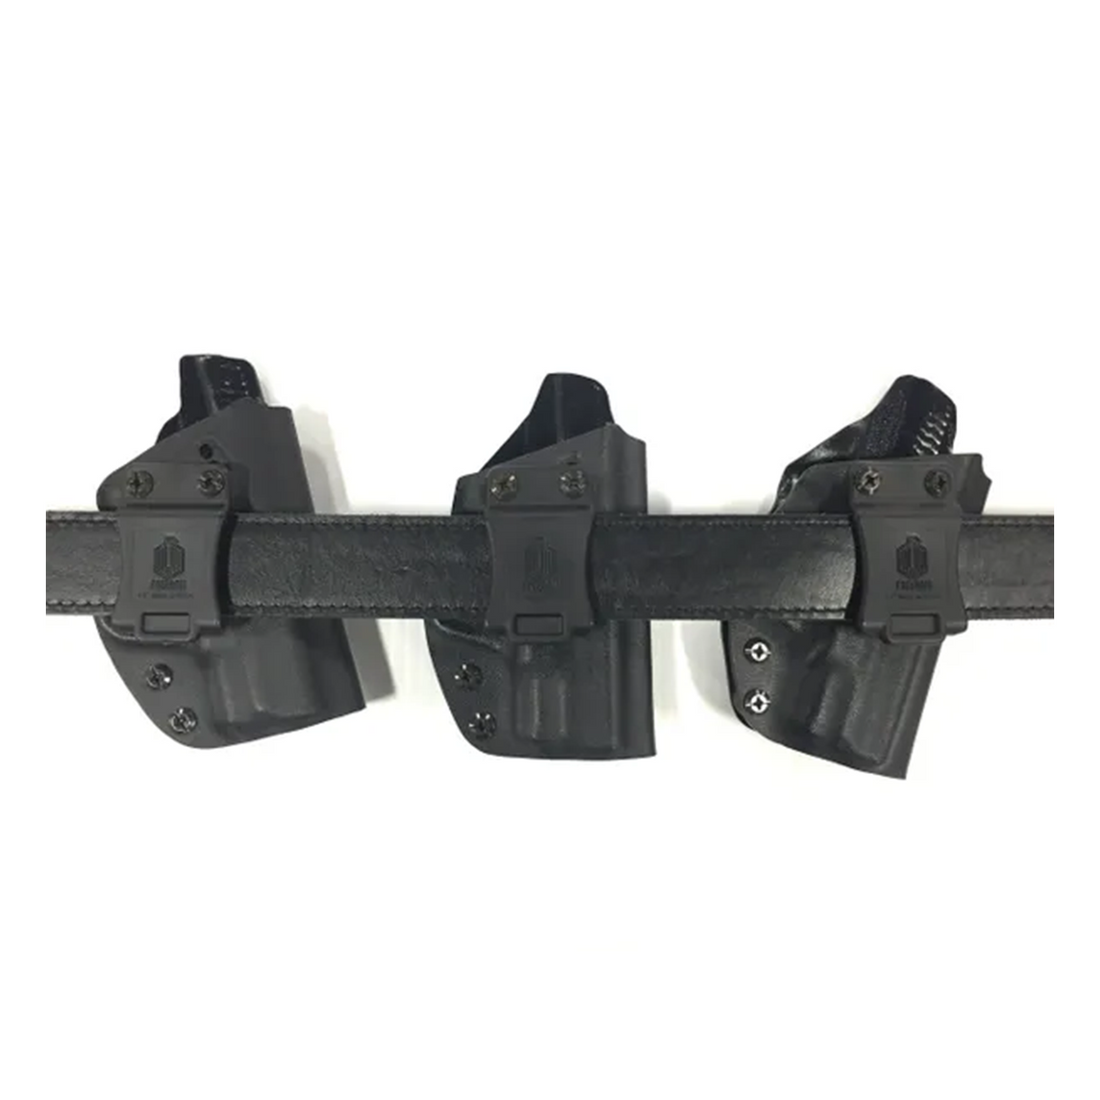 Palmetto State Armory IWB/OWB 2-n-1 Paddle Holsters